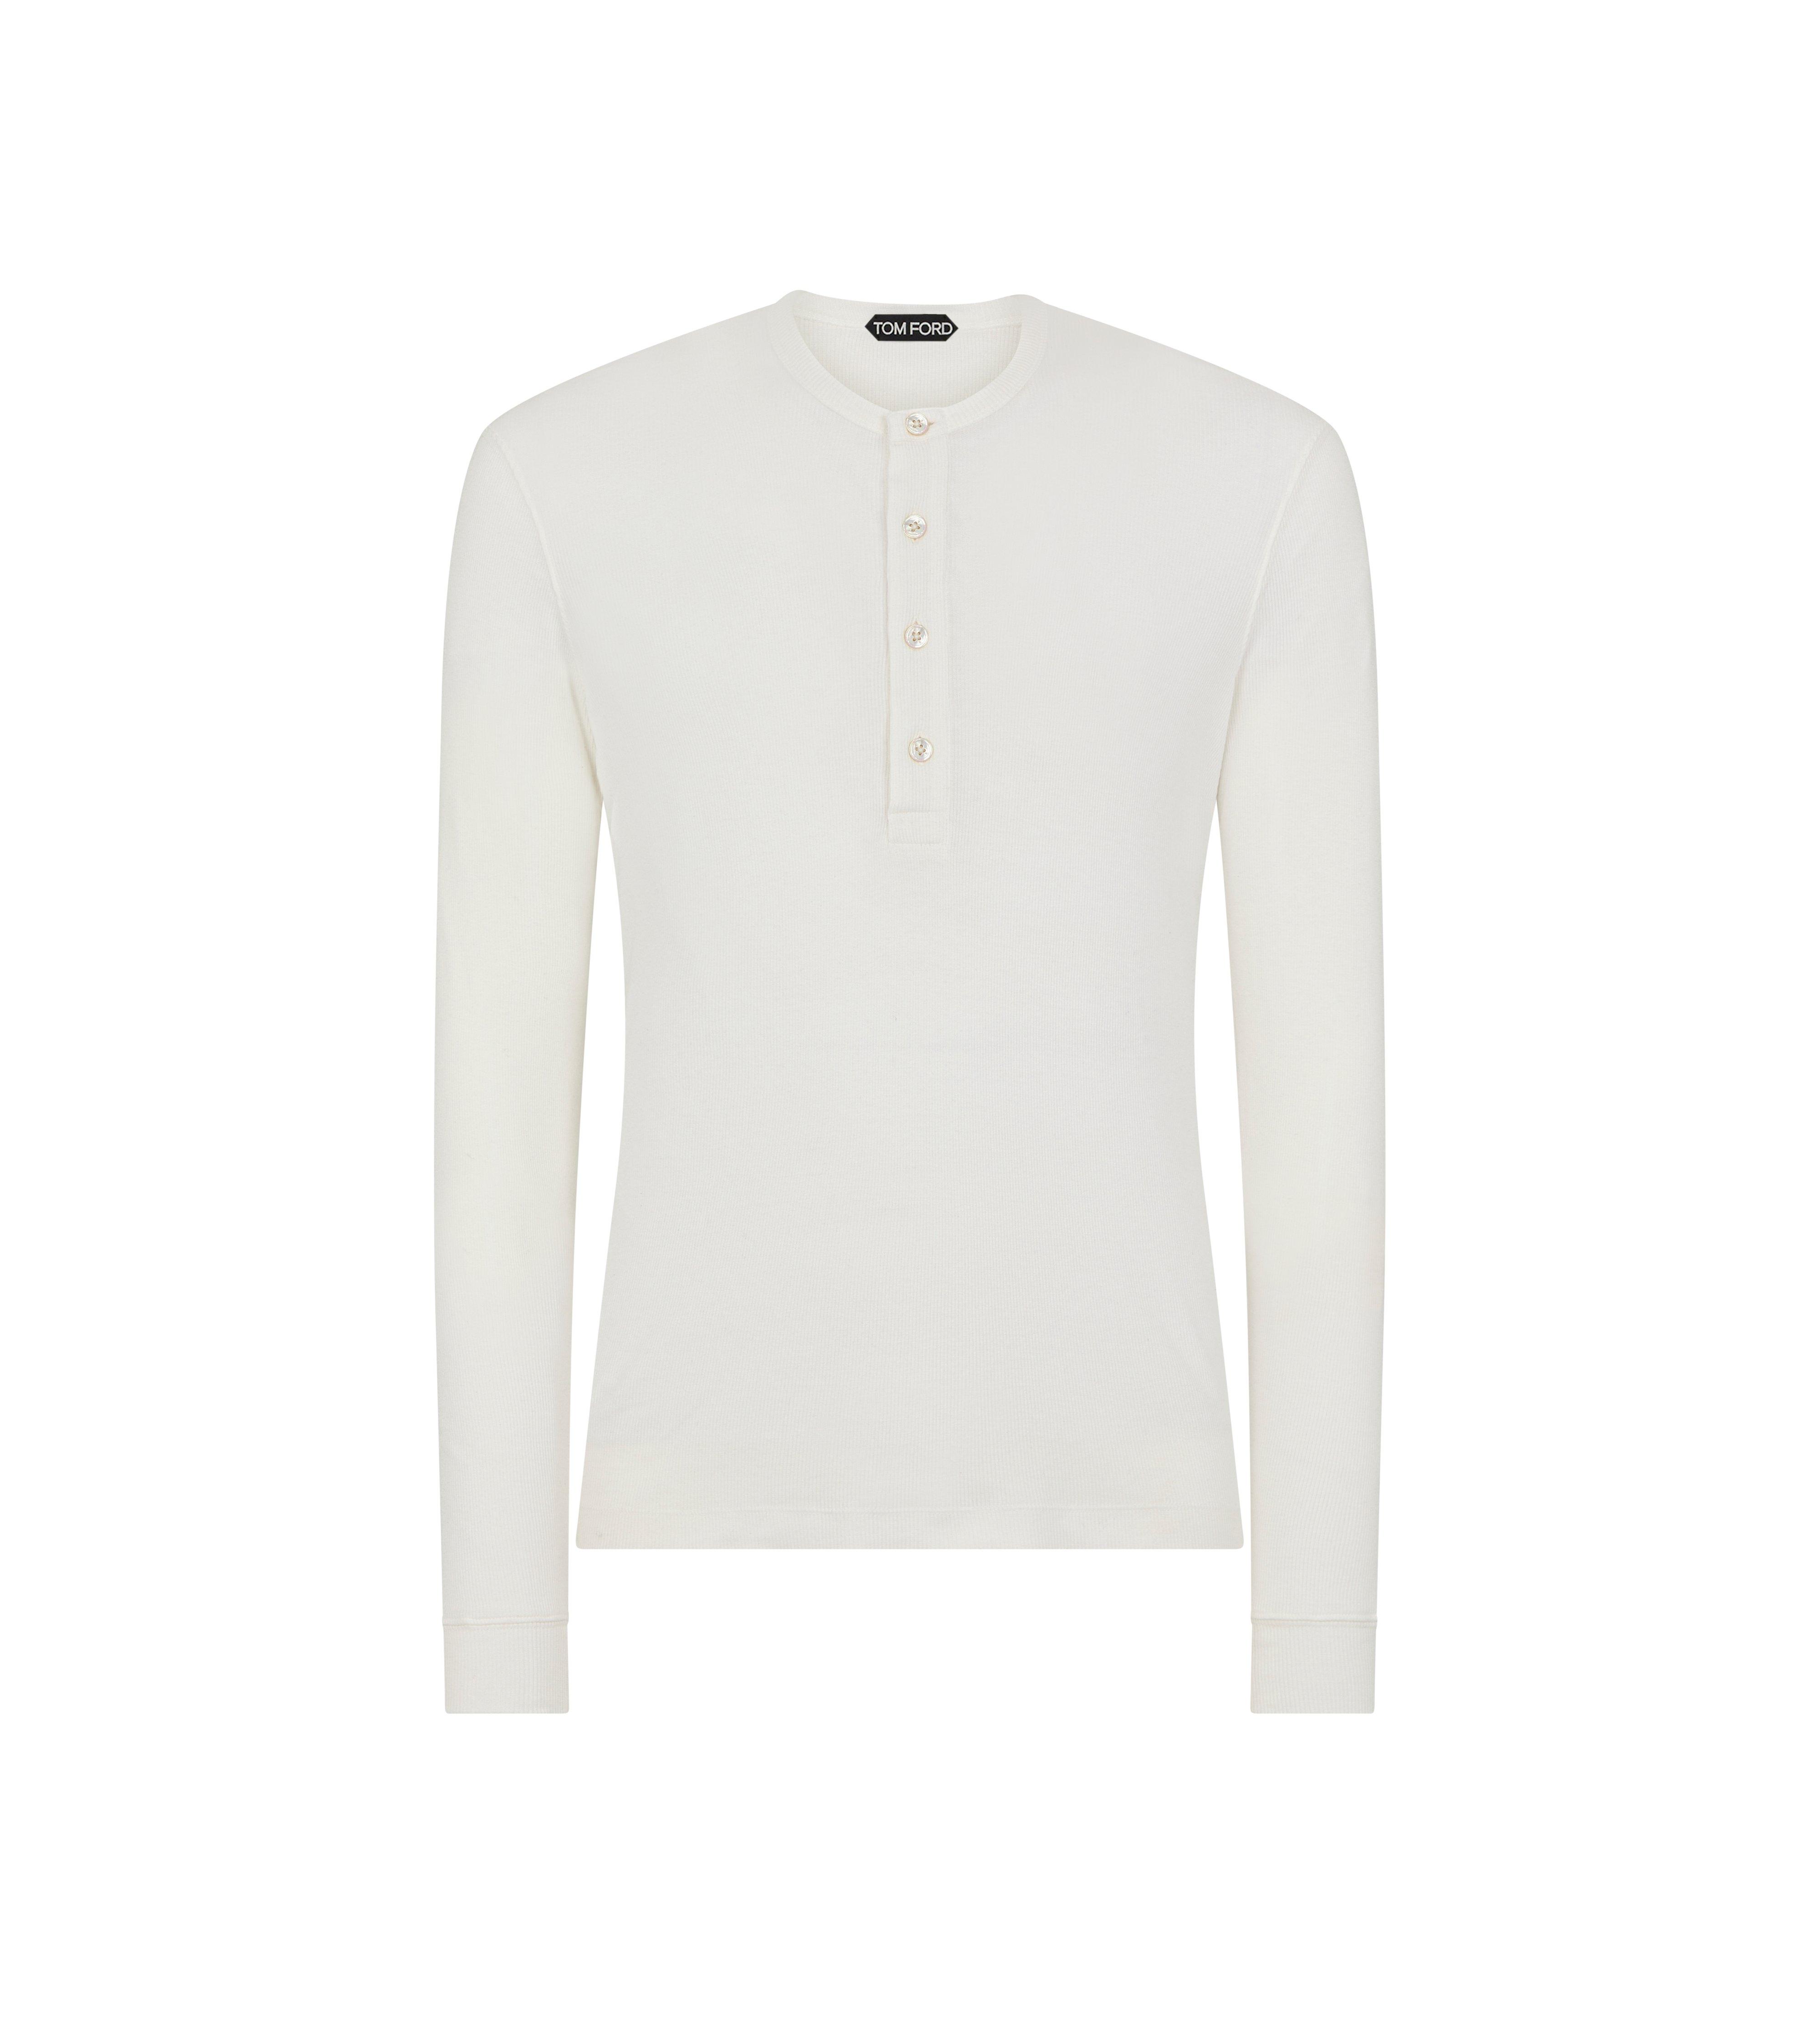 TOM FORD - Logo-Embroidered Lyocell and Cotton-Blend Jersey T-Shirt - White TOM  FORD